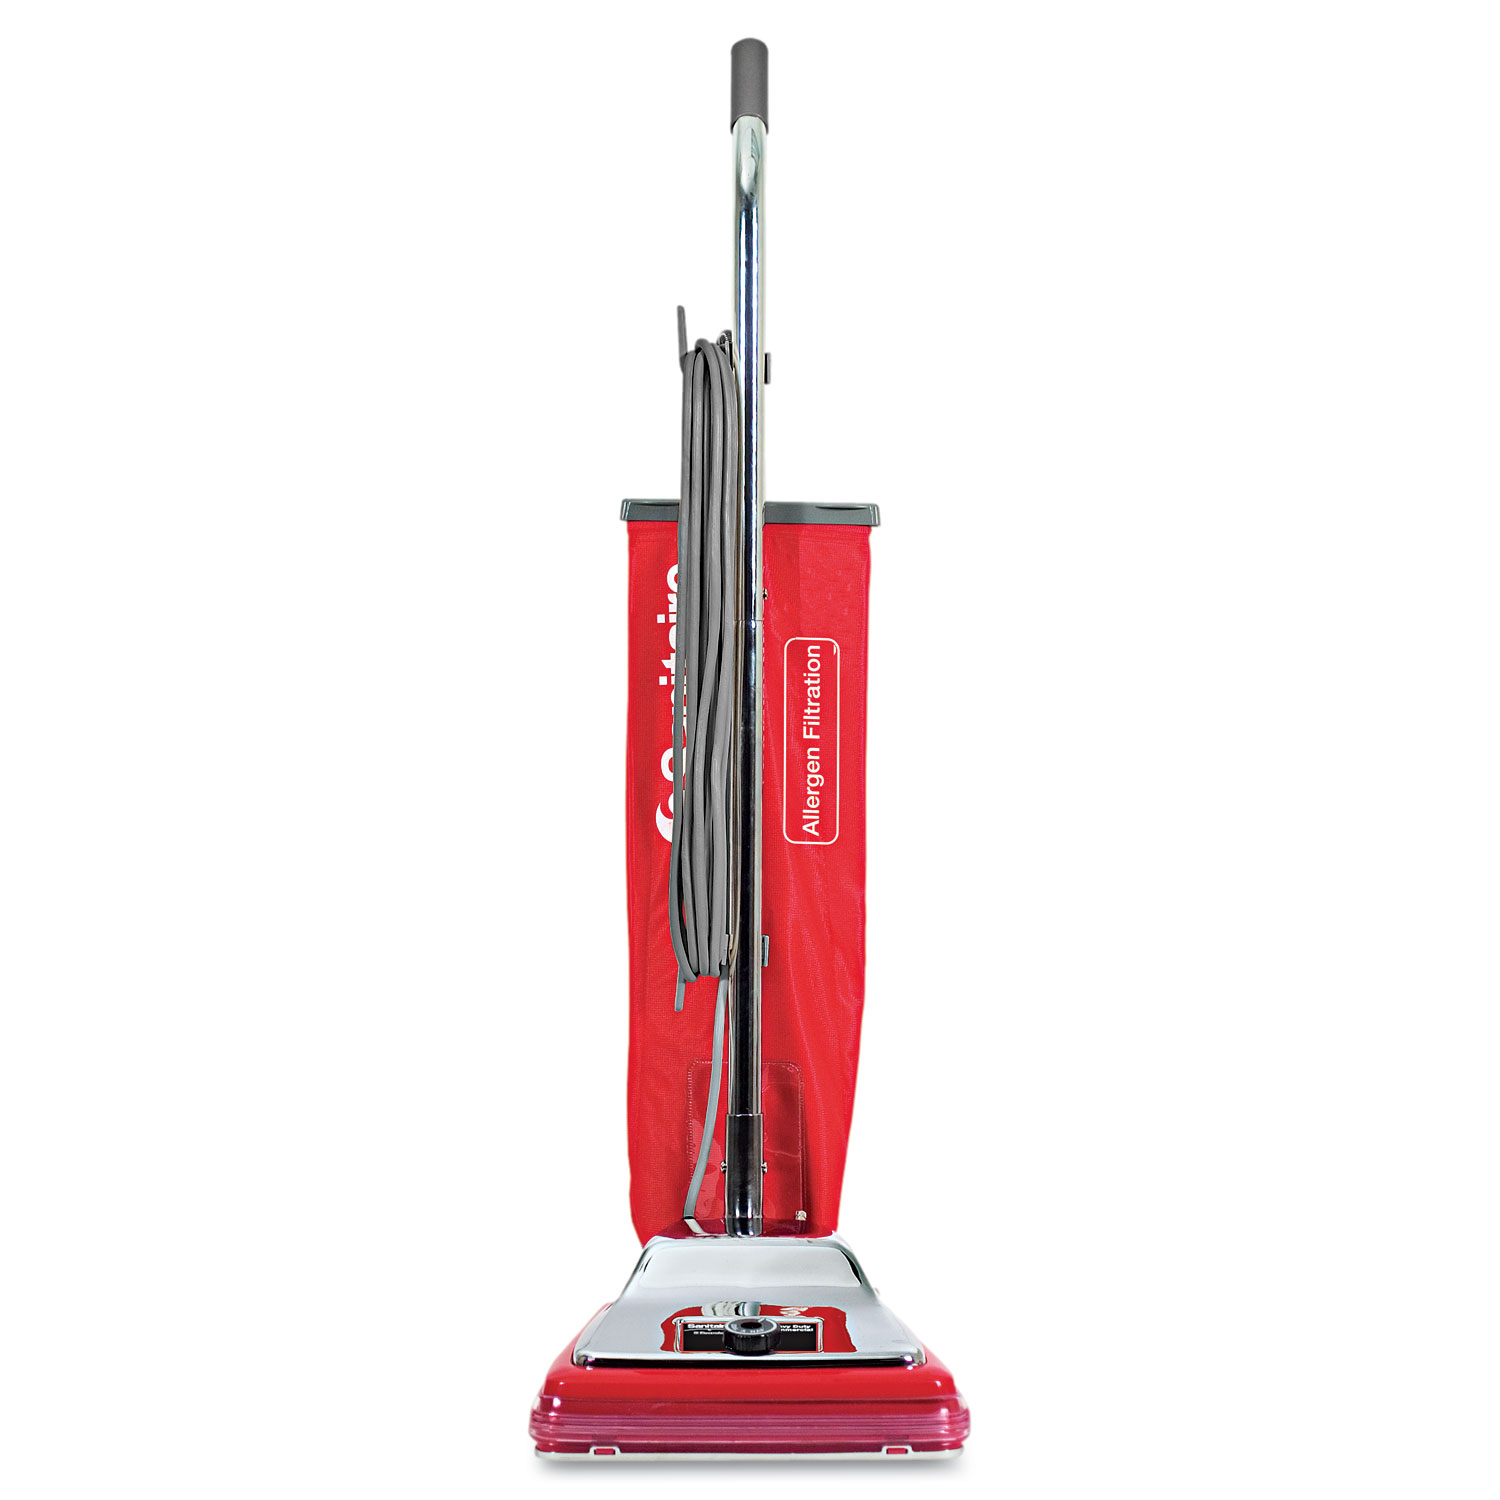  Sanitaire SC888N TRADITION Bagged Upright Vacuum, 7 Amp, 17.5 lb, Chrome/Red (EURSC888N) 